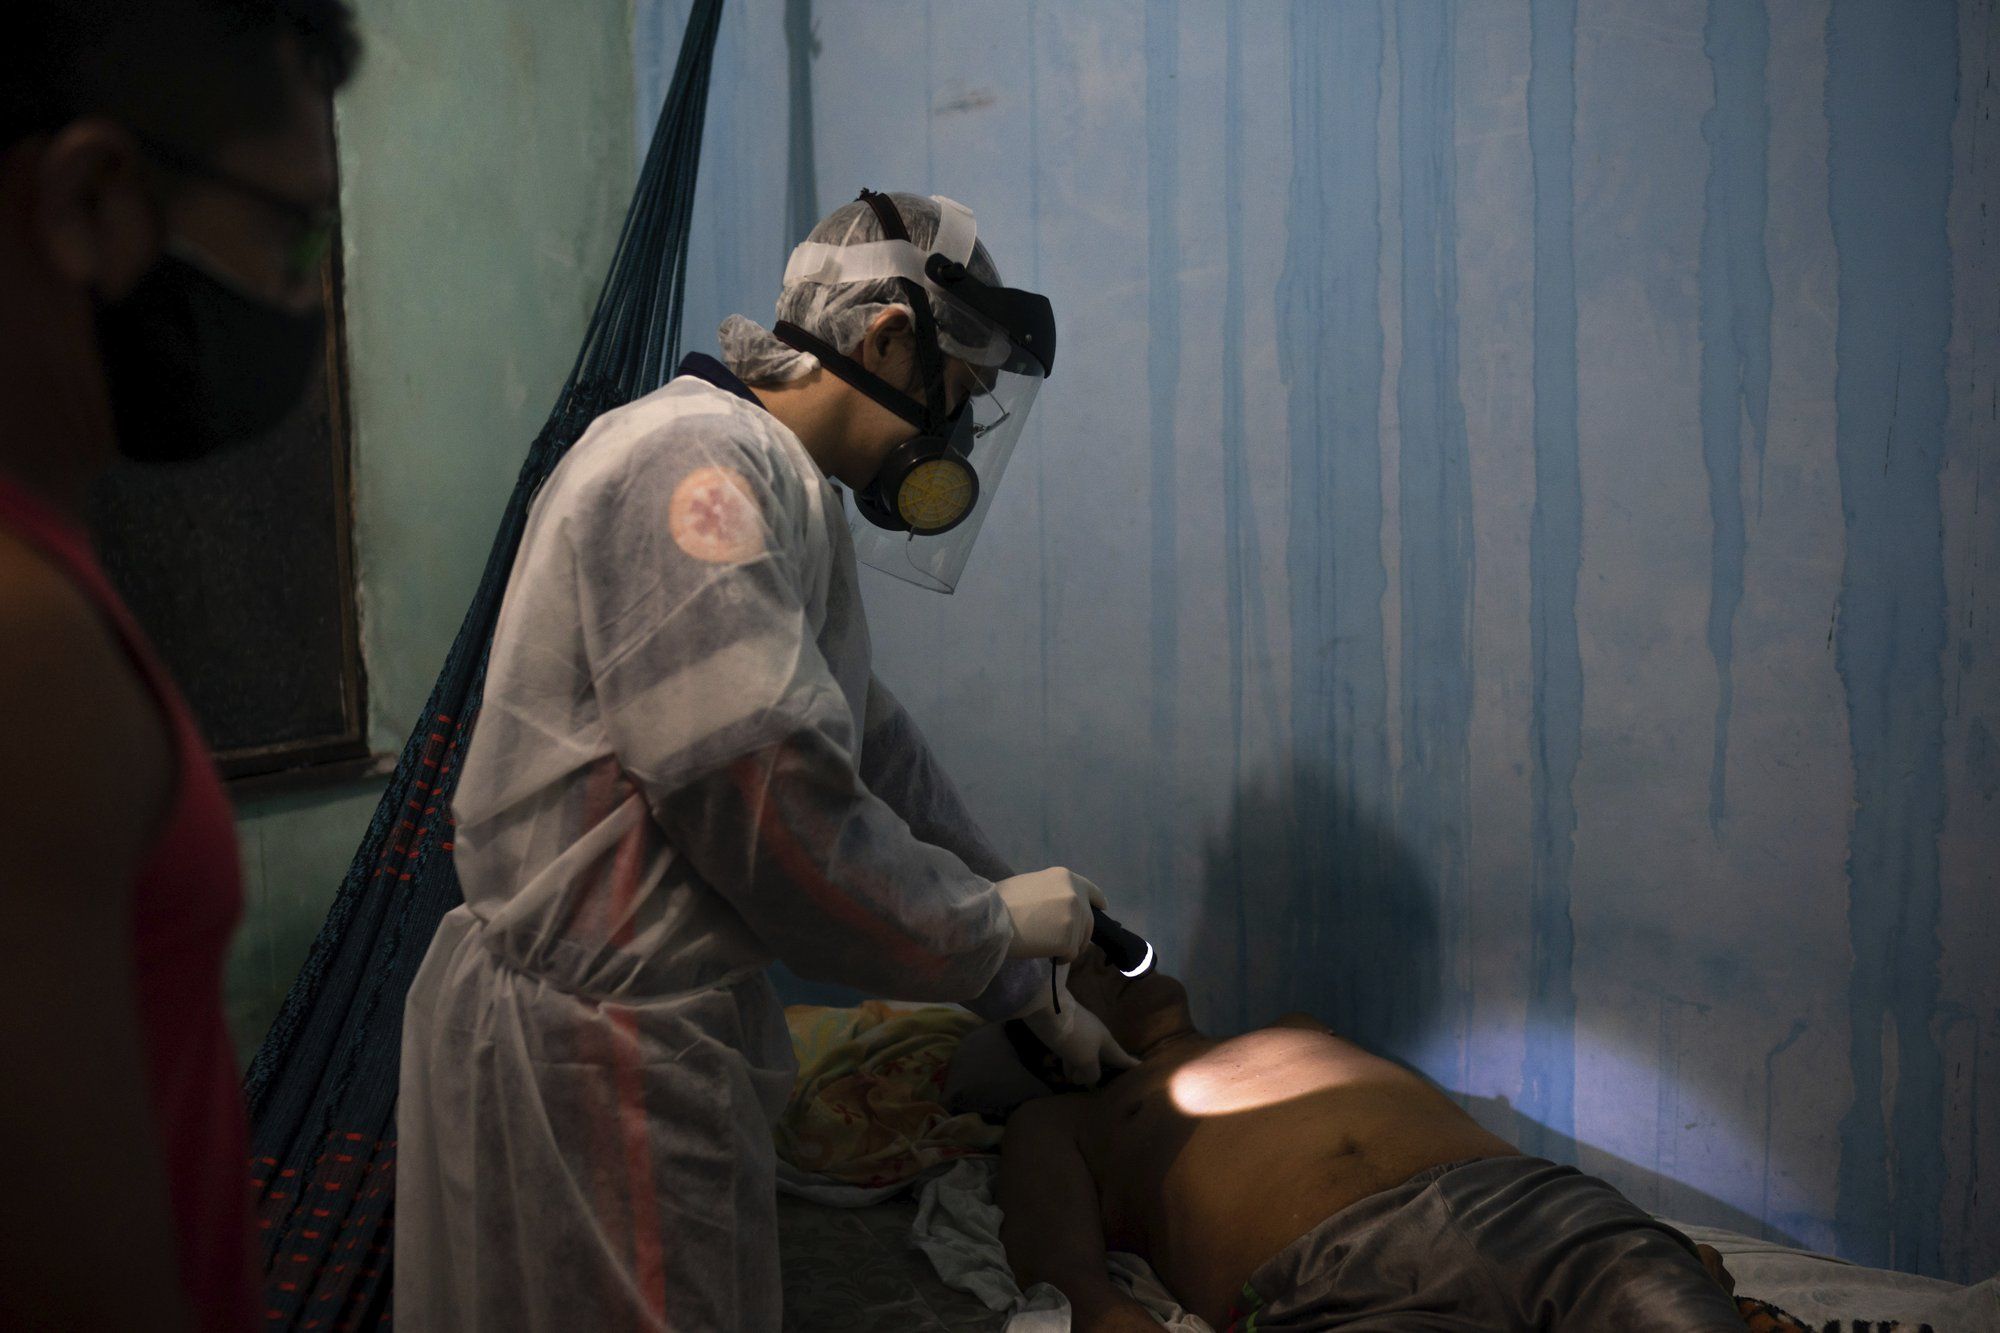 An ambulance doctor checks for the pulse of an elderly man who had just died at his home amid the new coronavirus pandemic in Manaus, Brazil, Thursday, May 21, 2020. Image by Felipe Dana / AP Photo. Brazil, 2020.